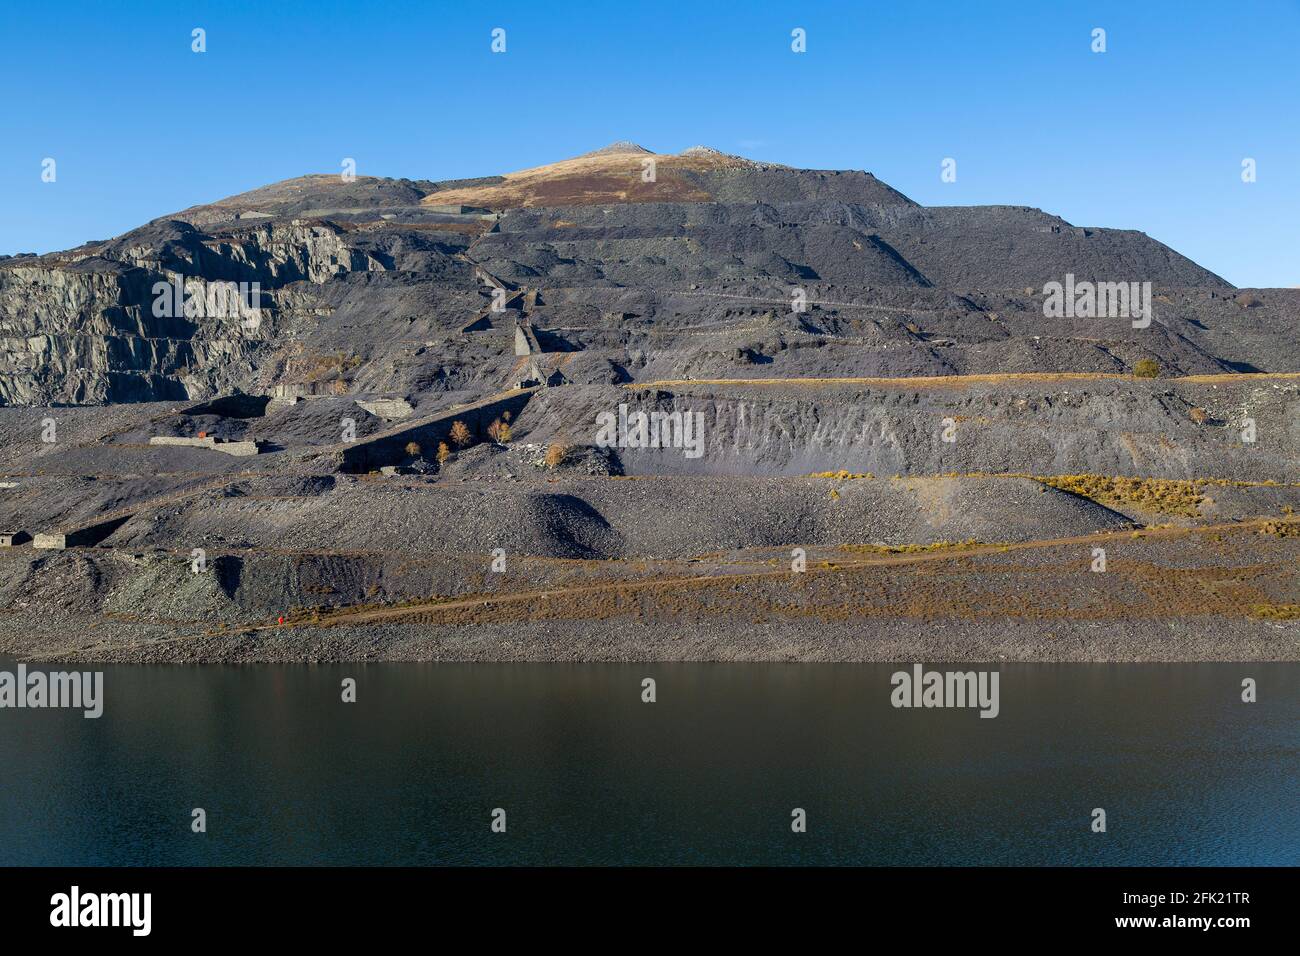 Dinorwic Quarry along the side of the Llyn Peris lake in Snowdonia, North Wales, UK Stock Photo